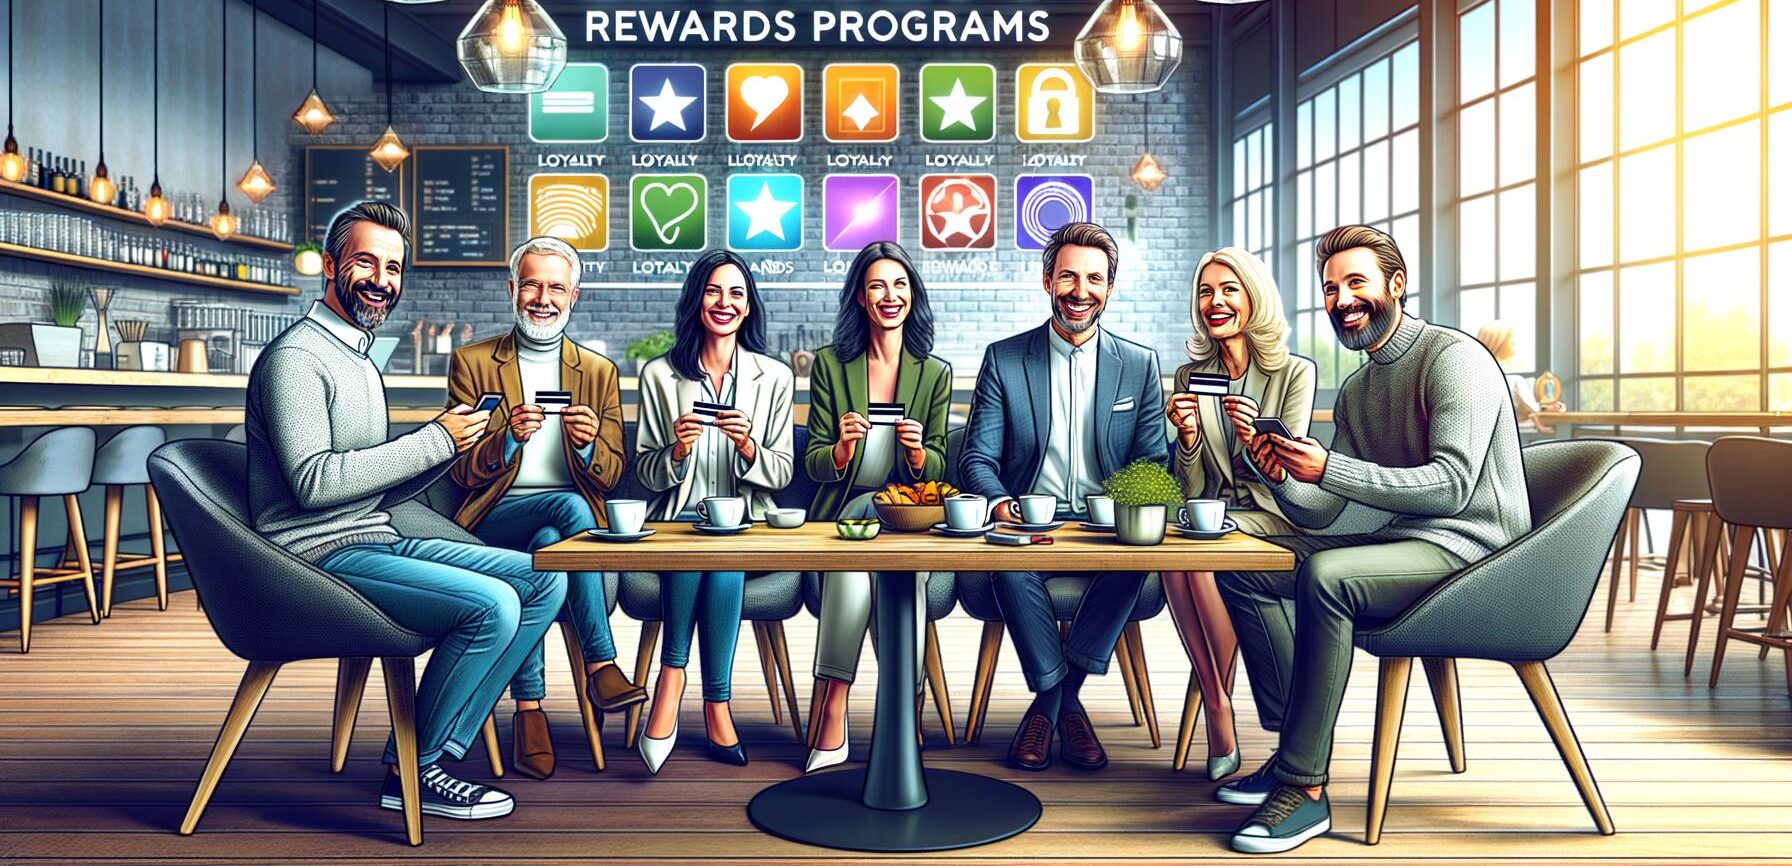 What Are the Latest Loyalty Rewards Trends?